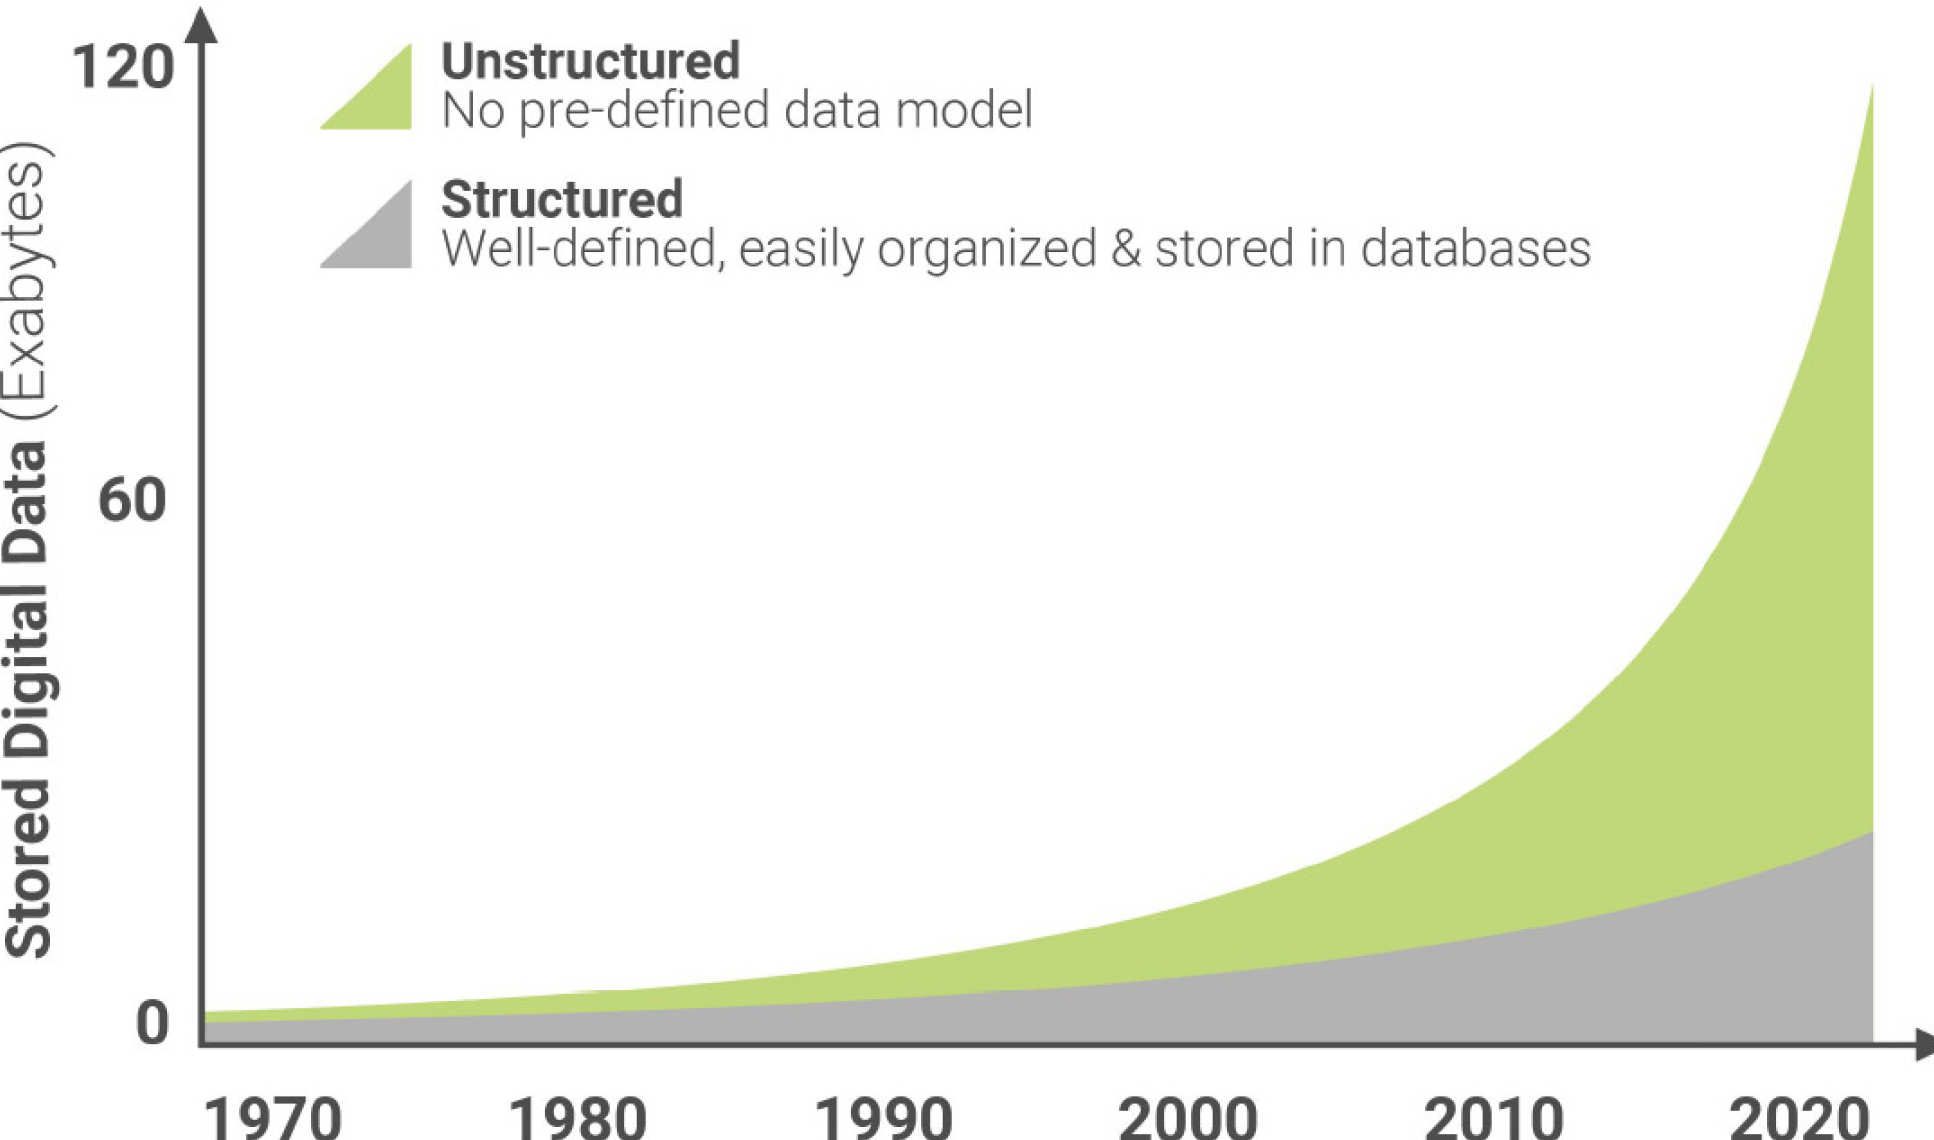 Data graph shows huge increase in unstructured data